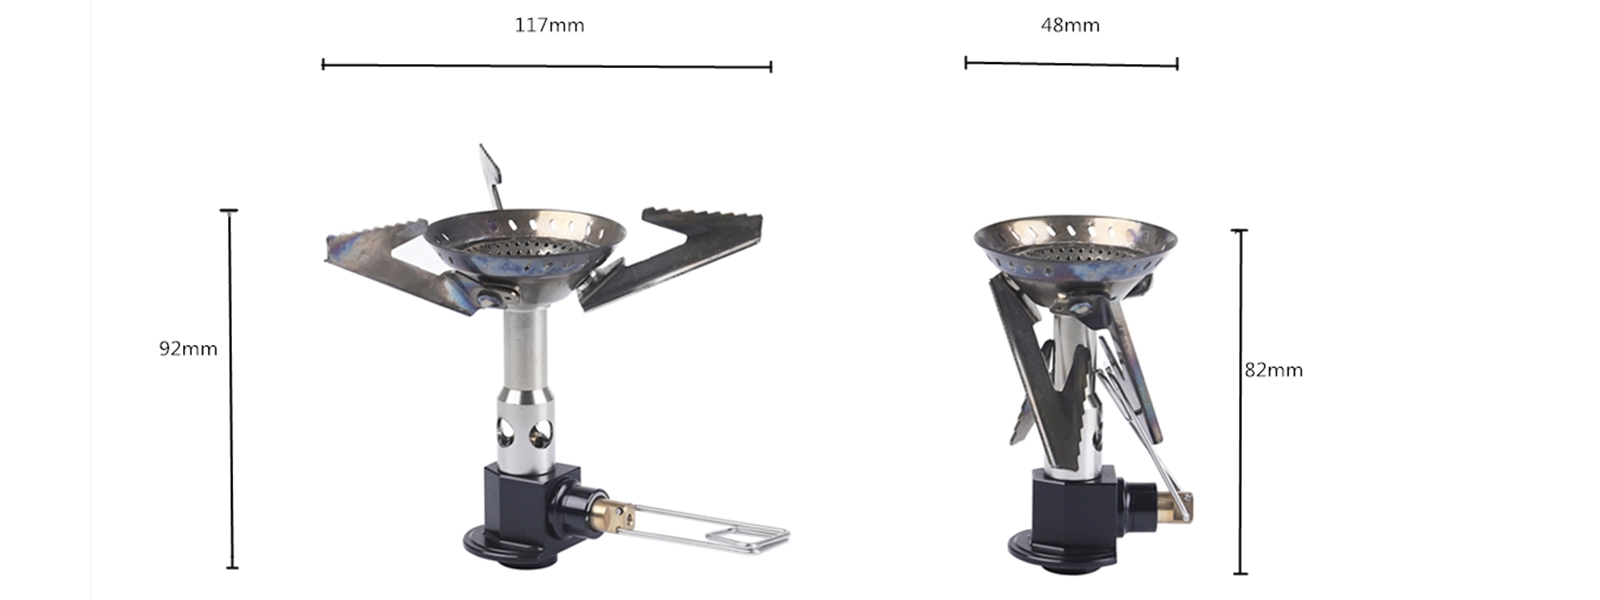 details of Lightweight Backpacking Canister Gas Stove with Integrated Pressure Regulator